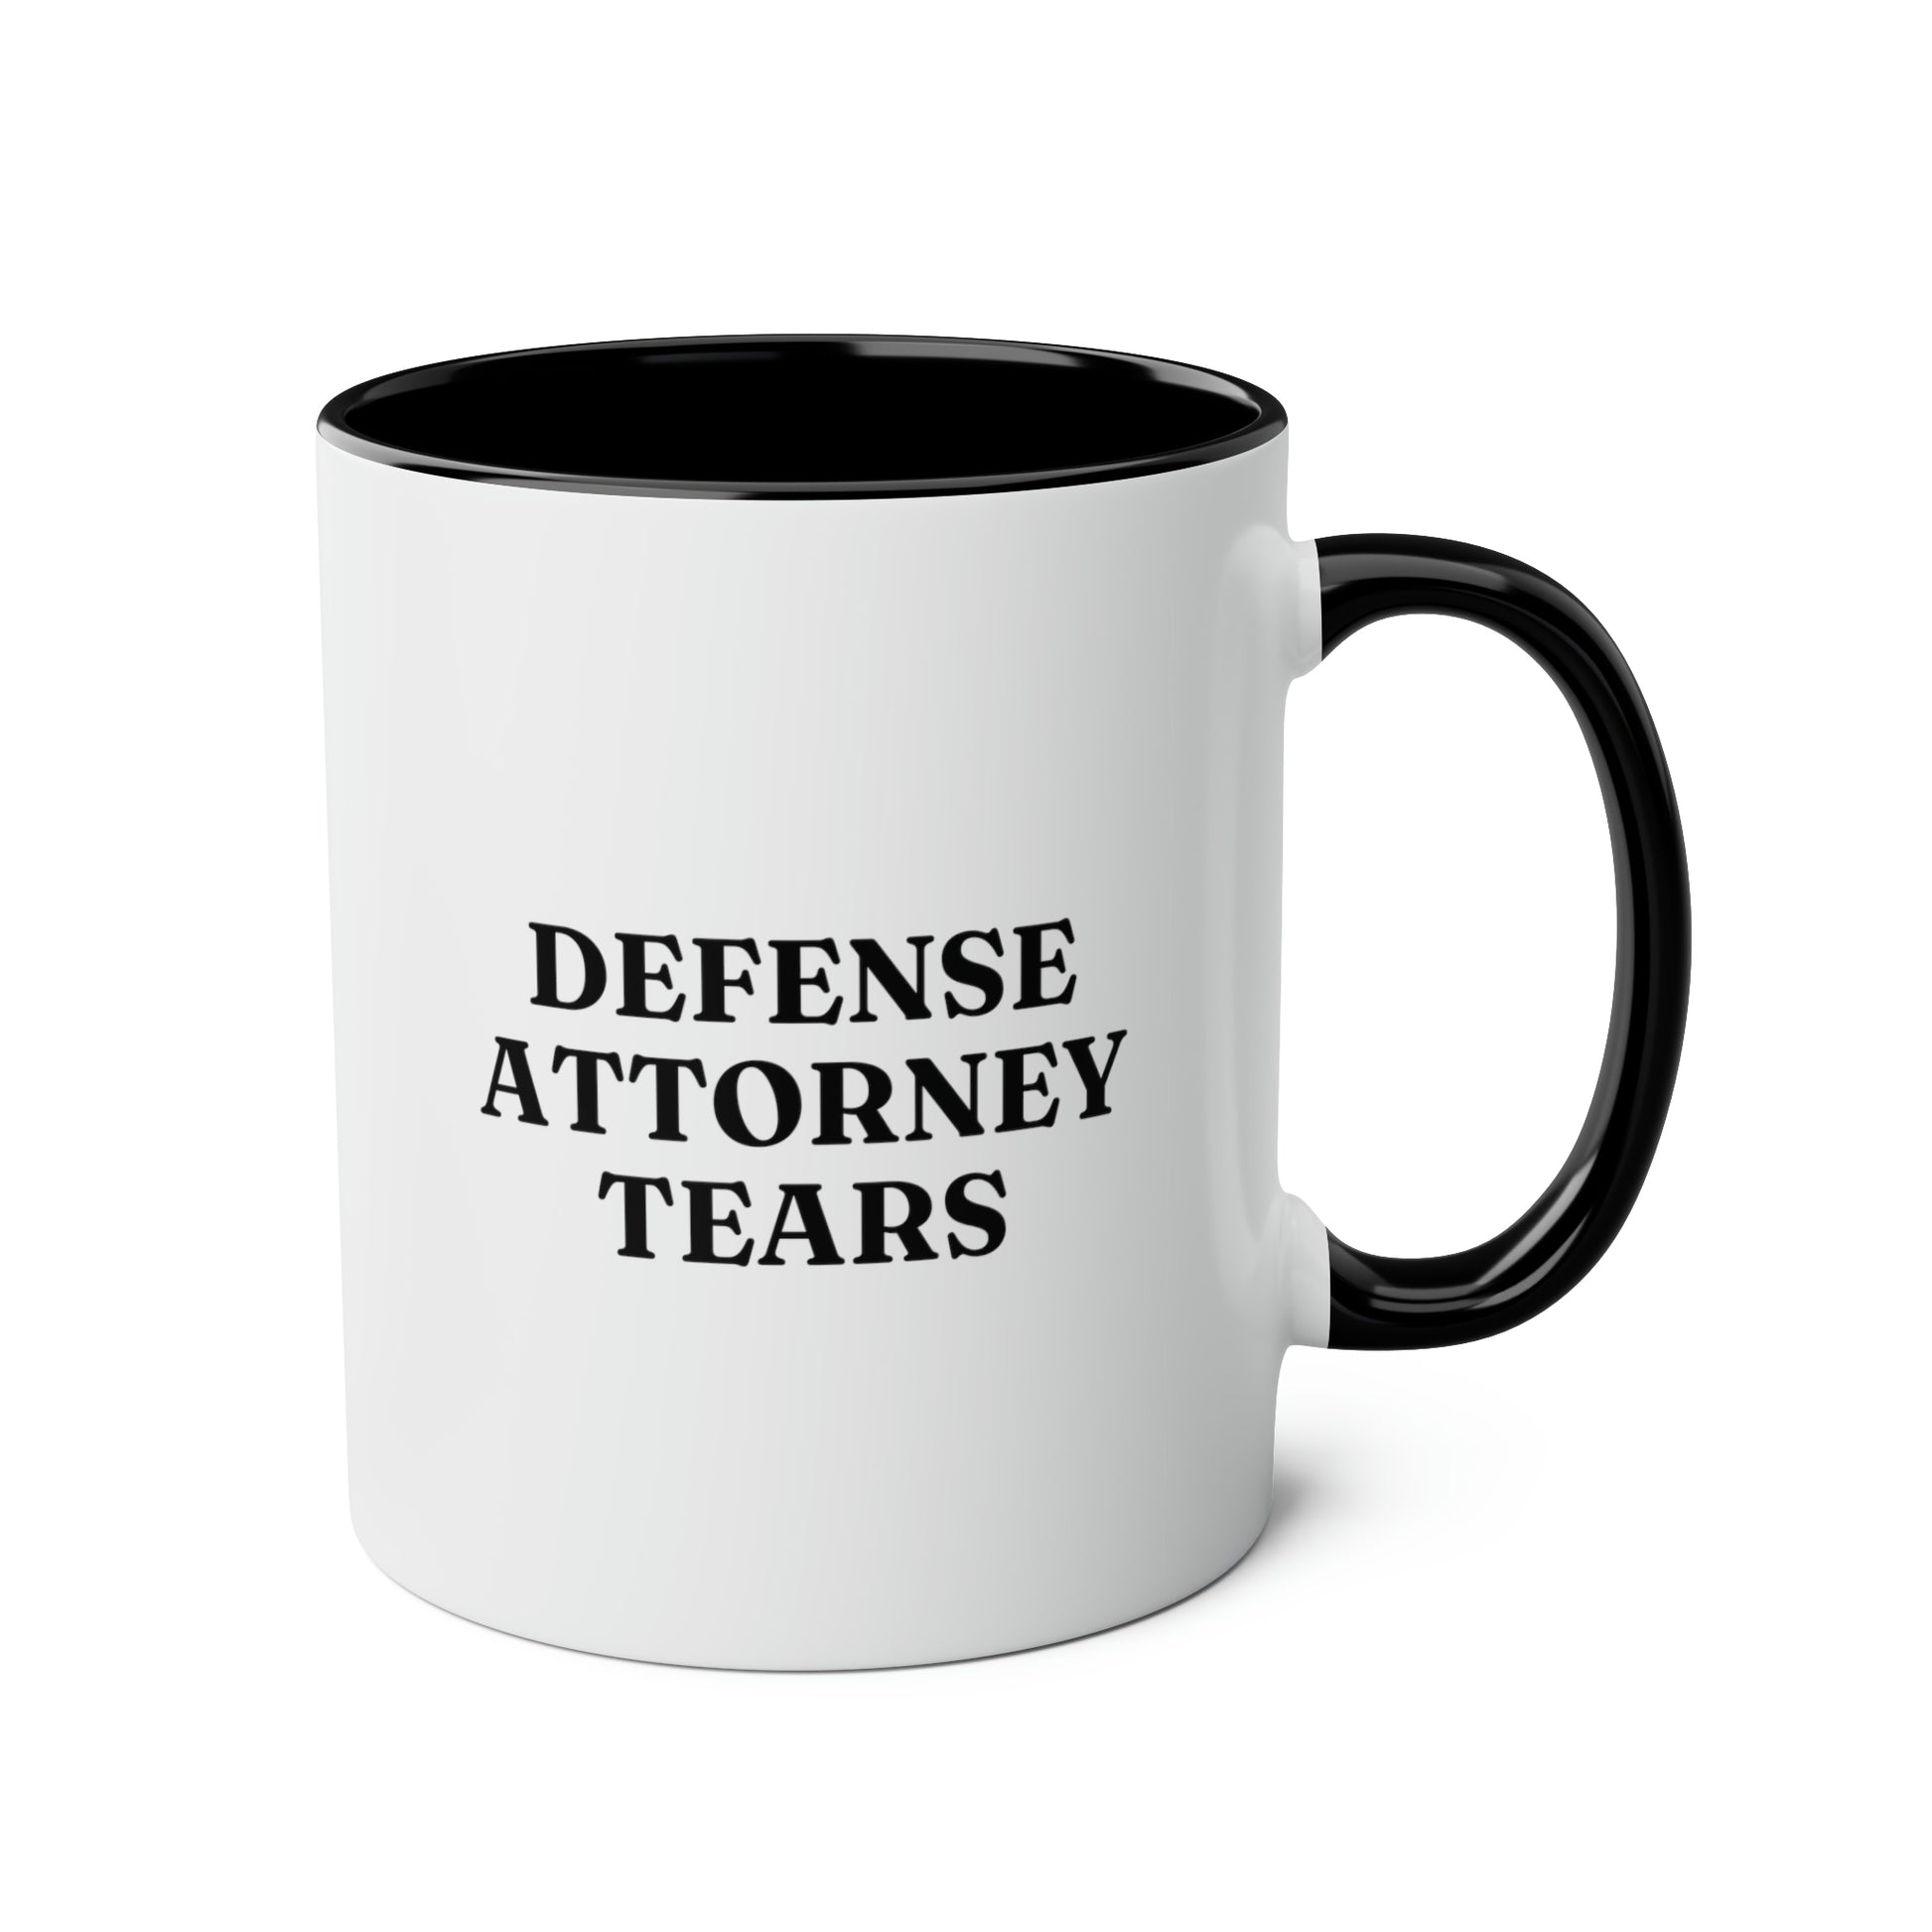 Defense Attorney Tears 11oz white with black accent funny large coffee mug gift for prosecutor lawyer attorney plaintiff cup waveywares wavey wares wavywares wavy wares